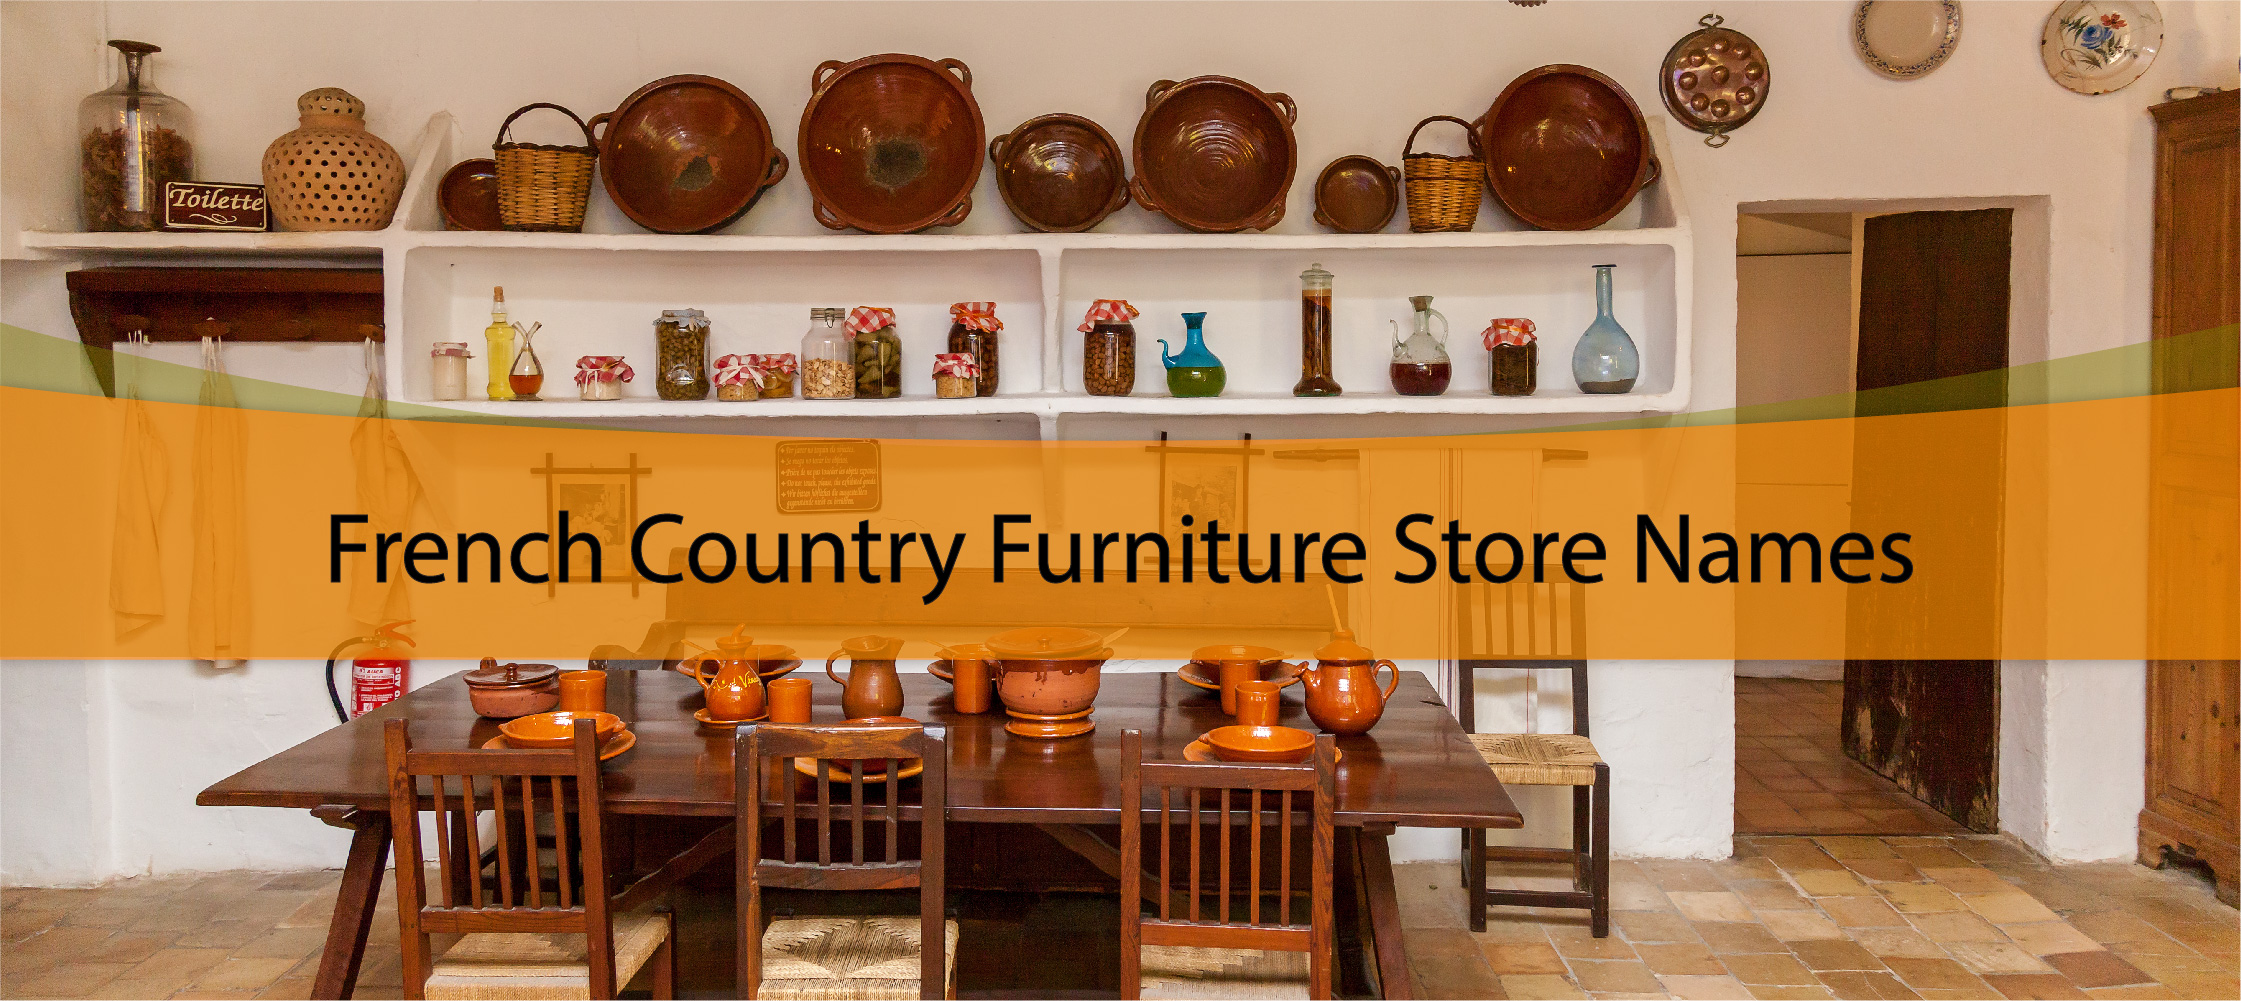 French Country Furniture Store Names